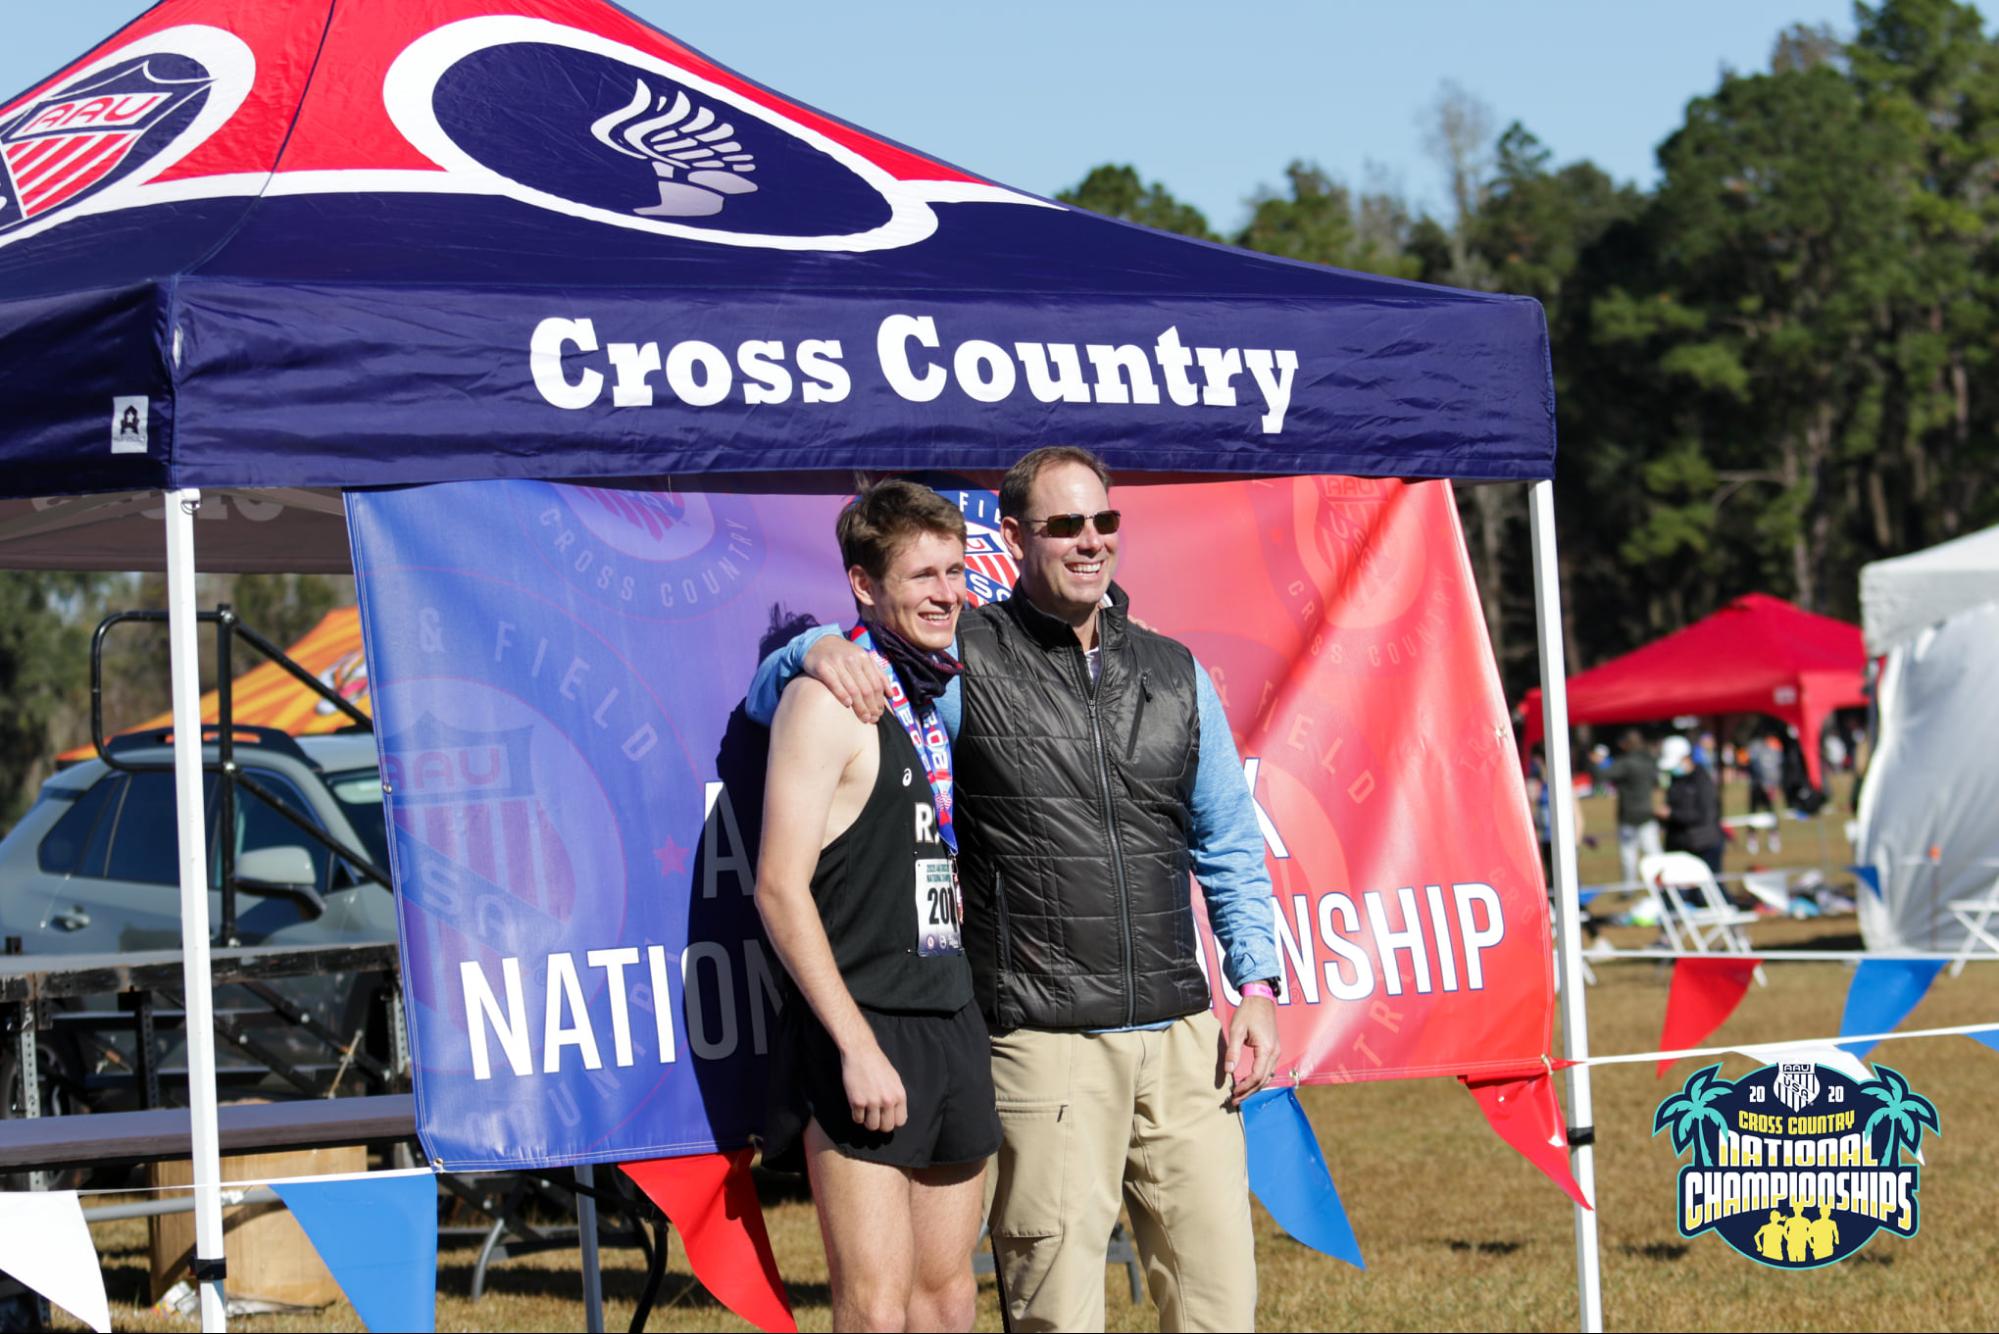 Athlete and coach smiling in front of an AAU National Championship Cross Country tent on a sunny day